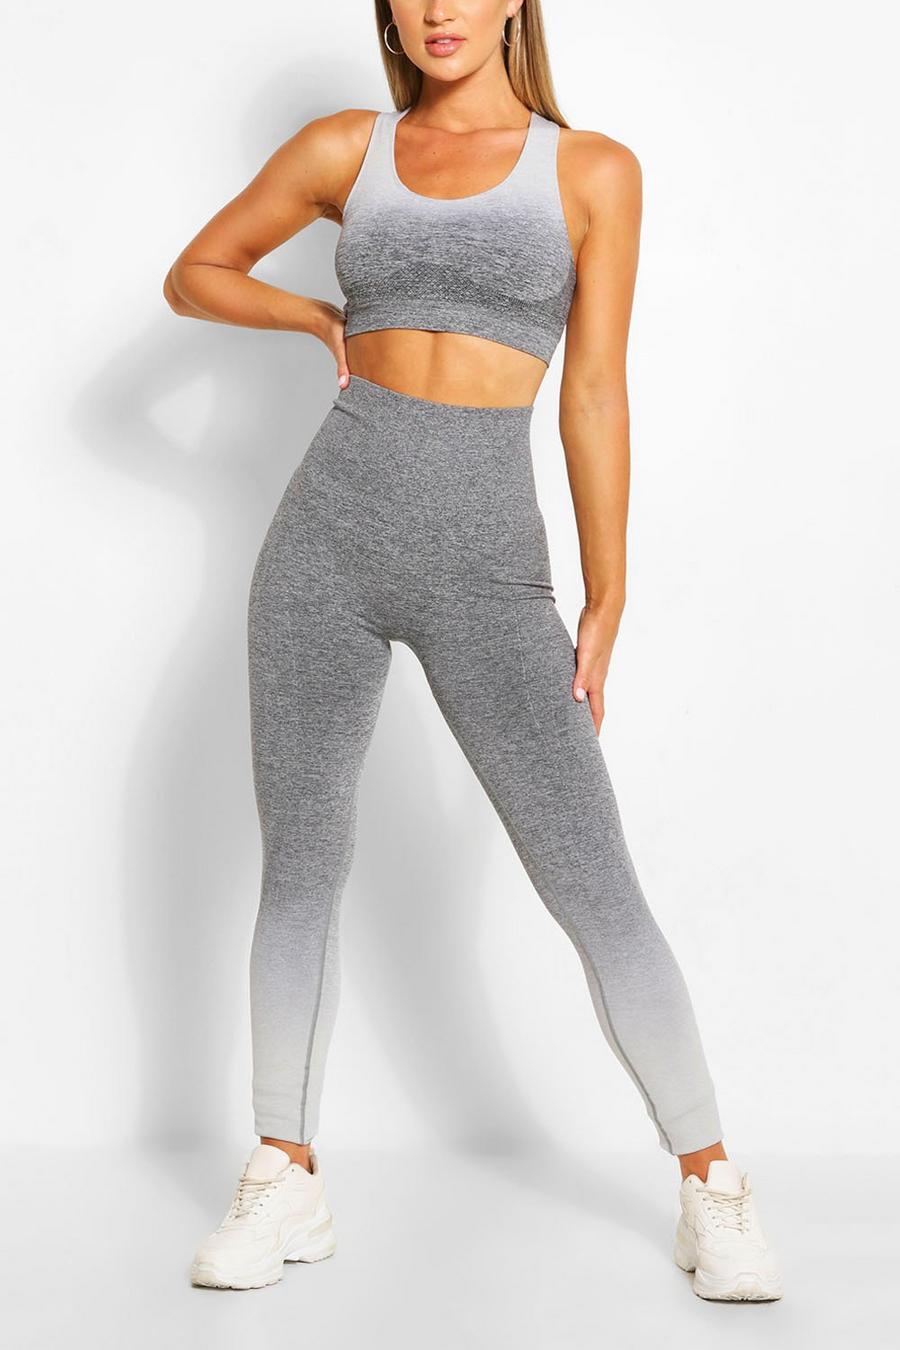 Grey Ombre Sports Leggings image number 1